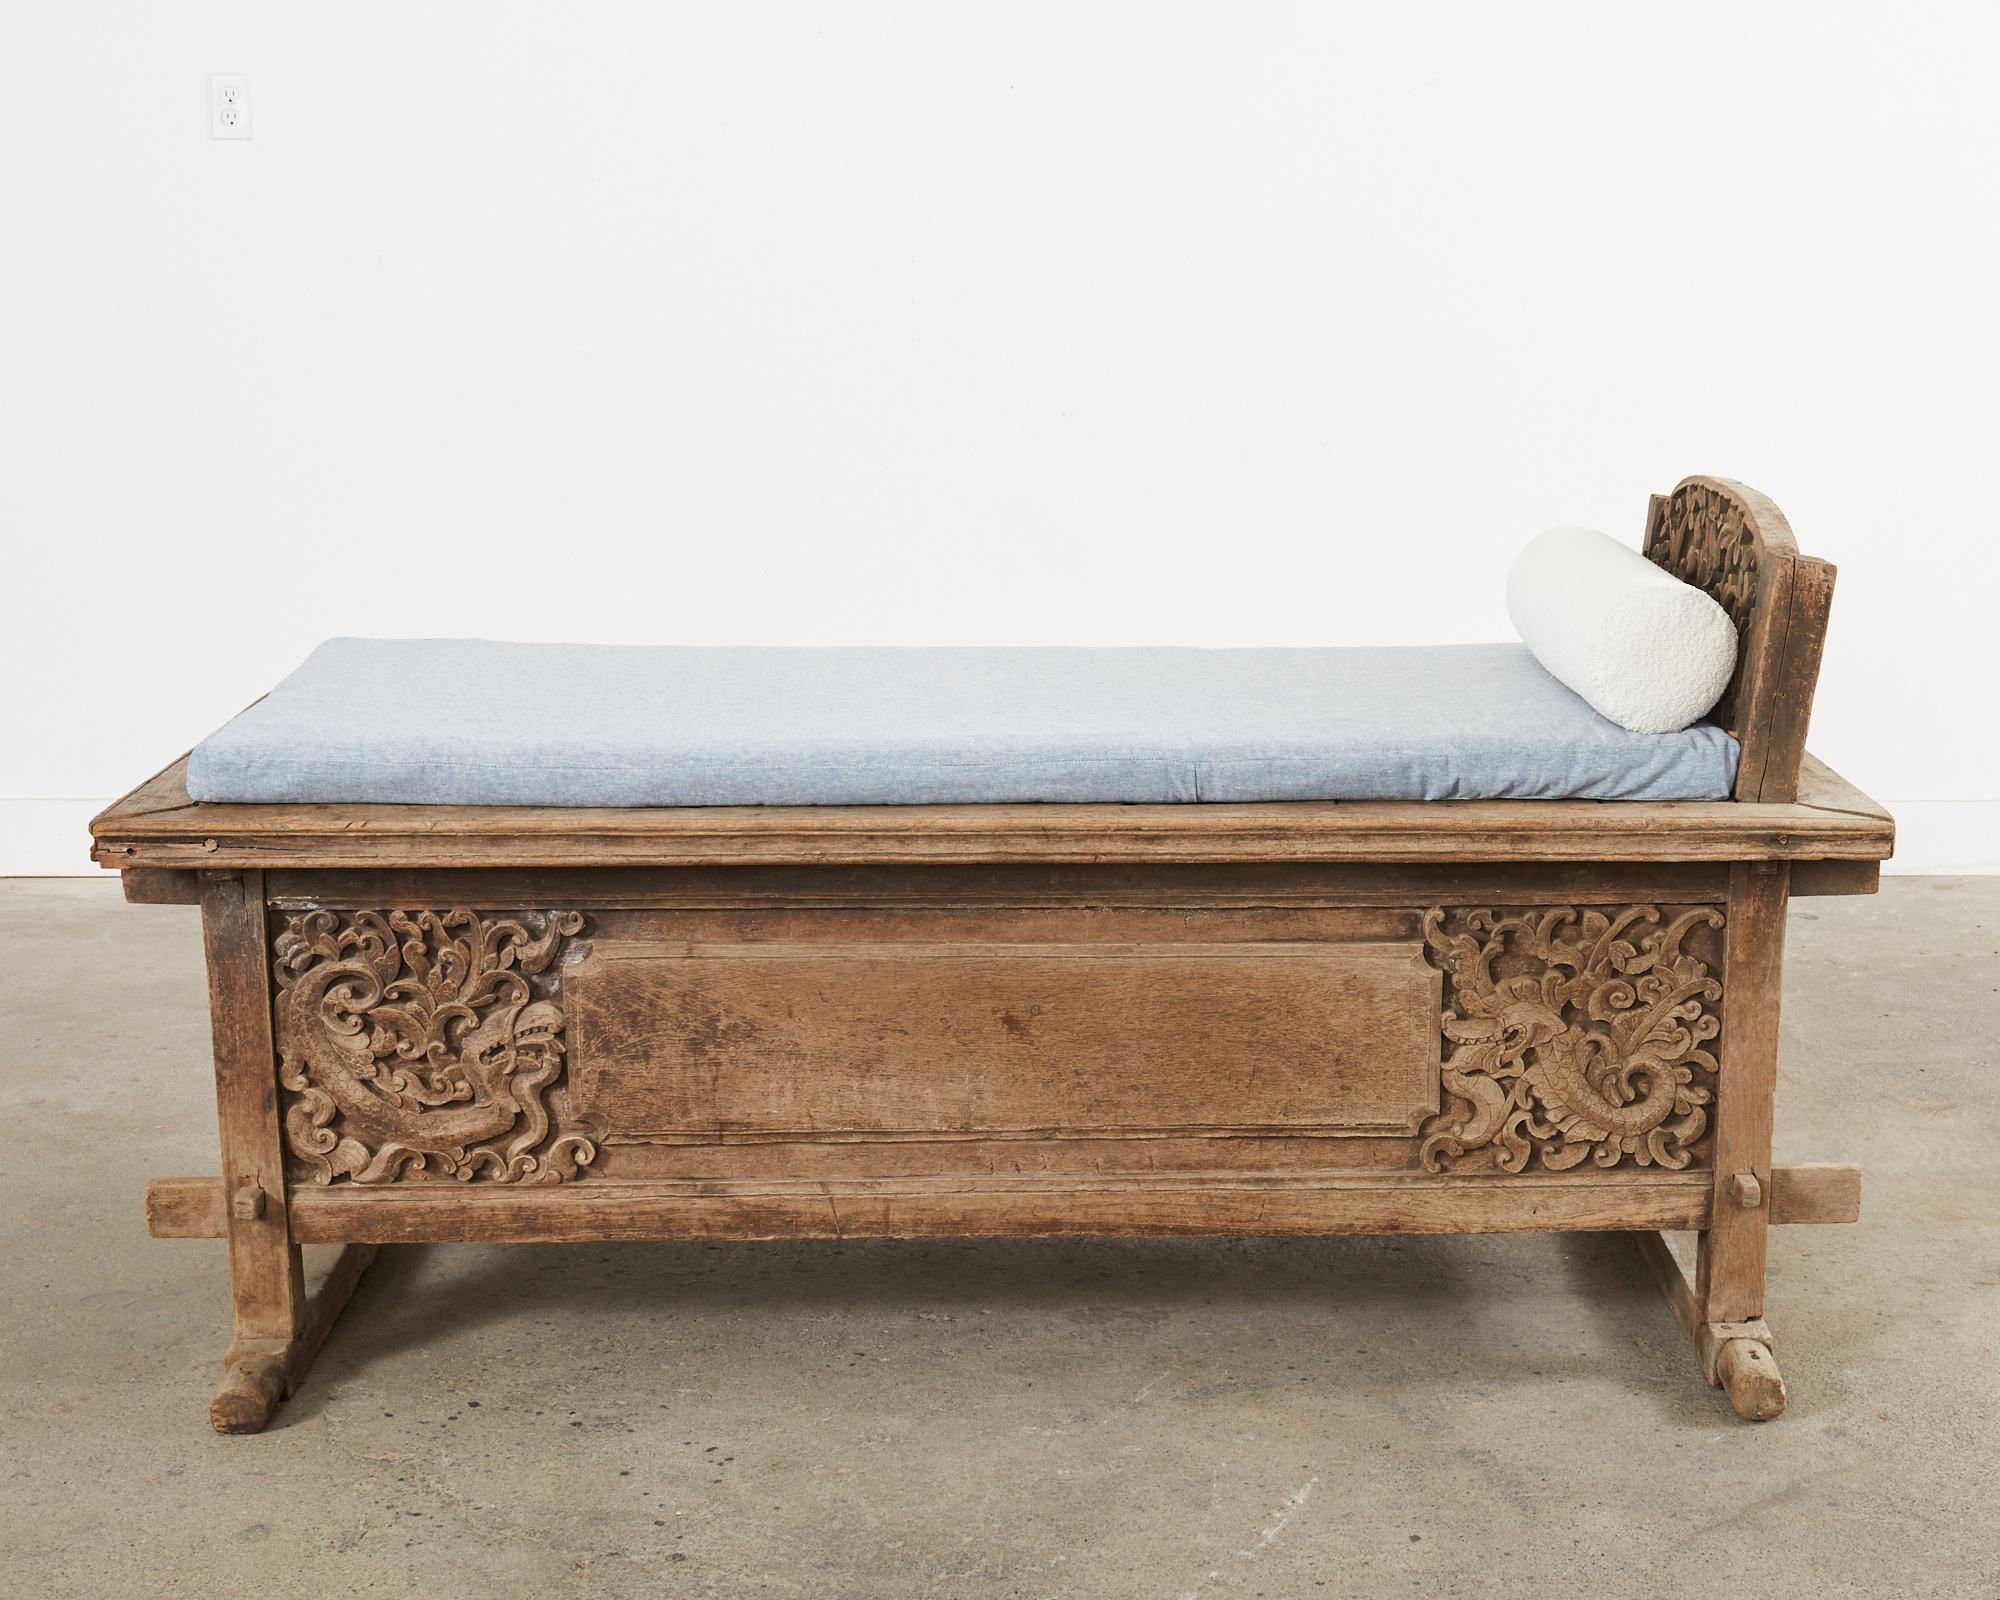 Amazing Indo-Javanese hand-carved wedding chest daybed crafted from teak. Known as a Grobog the chest was filled with gifts for the bride inside the storage area. The case is embellished with beautiful carved details. Constructed almost entirely